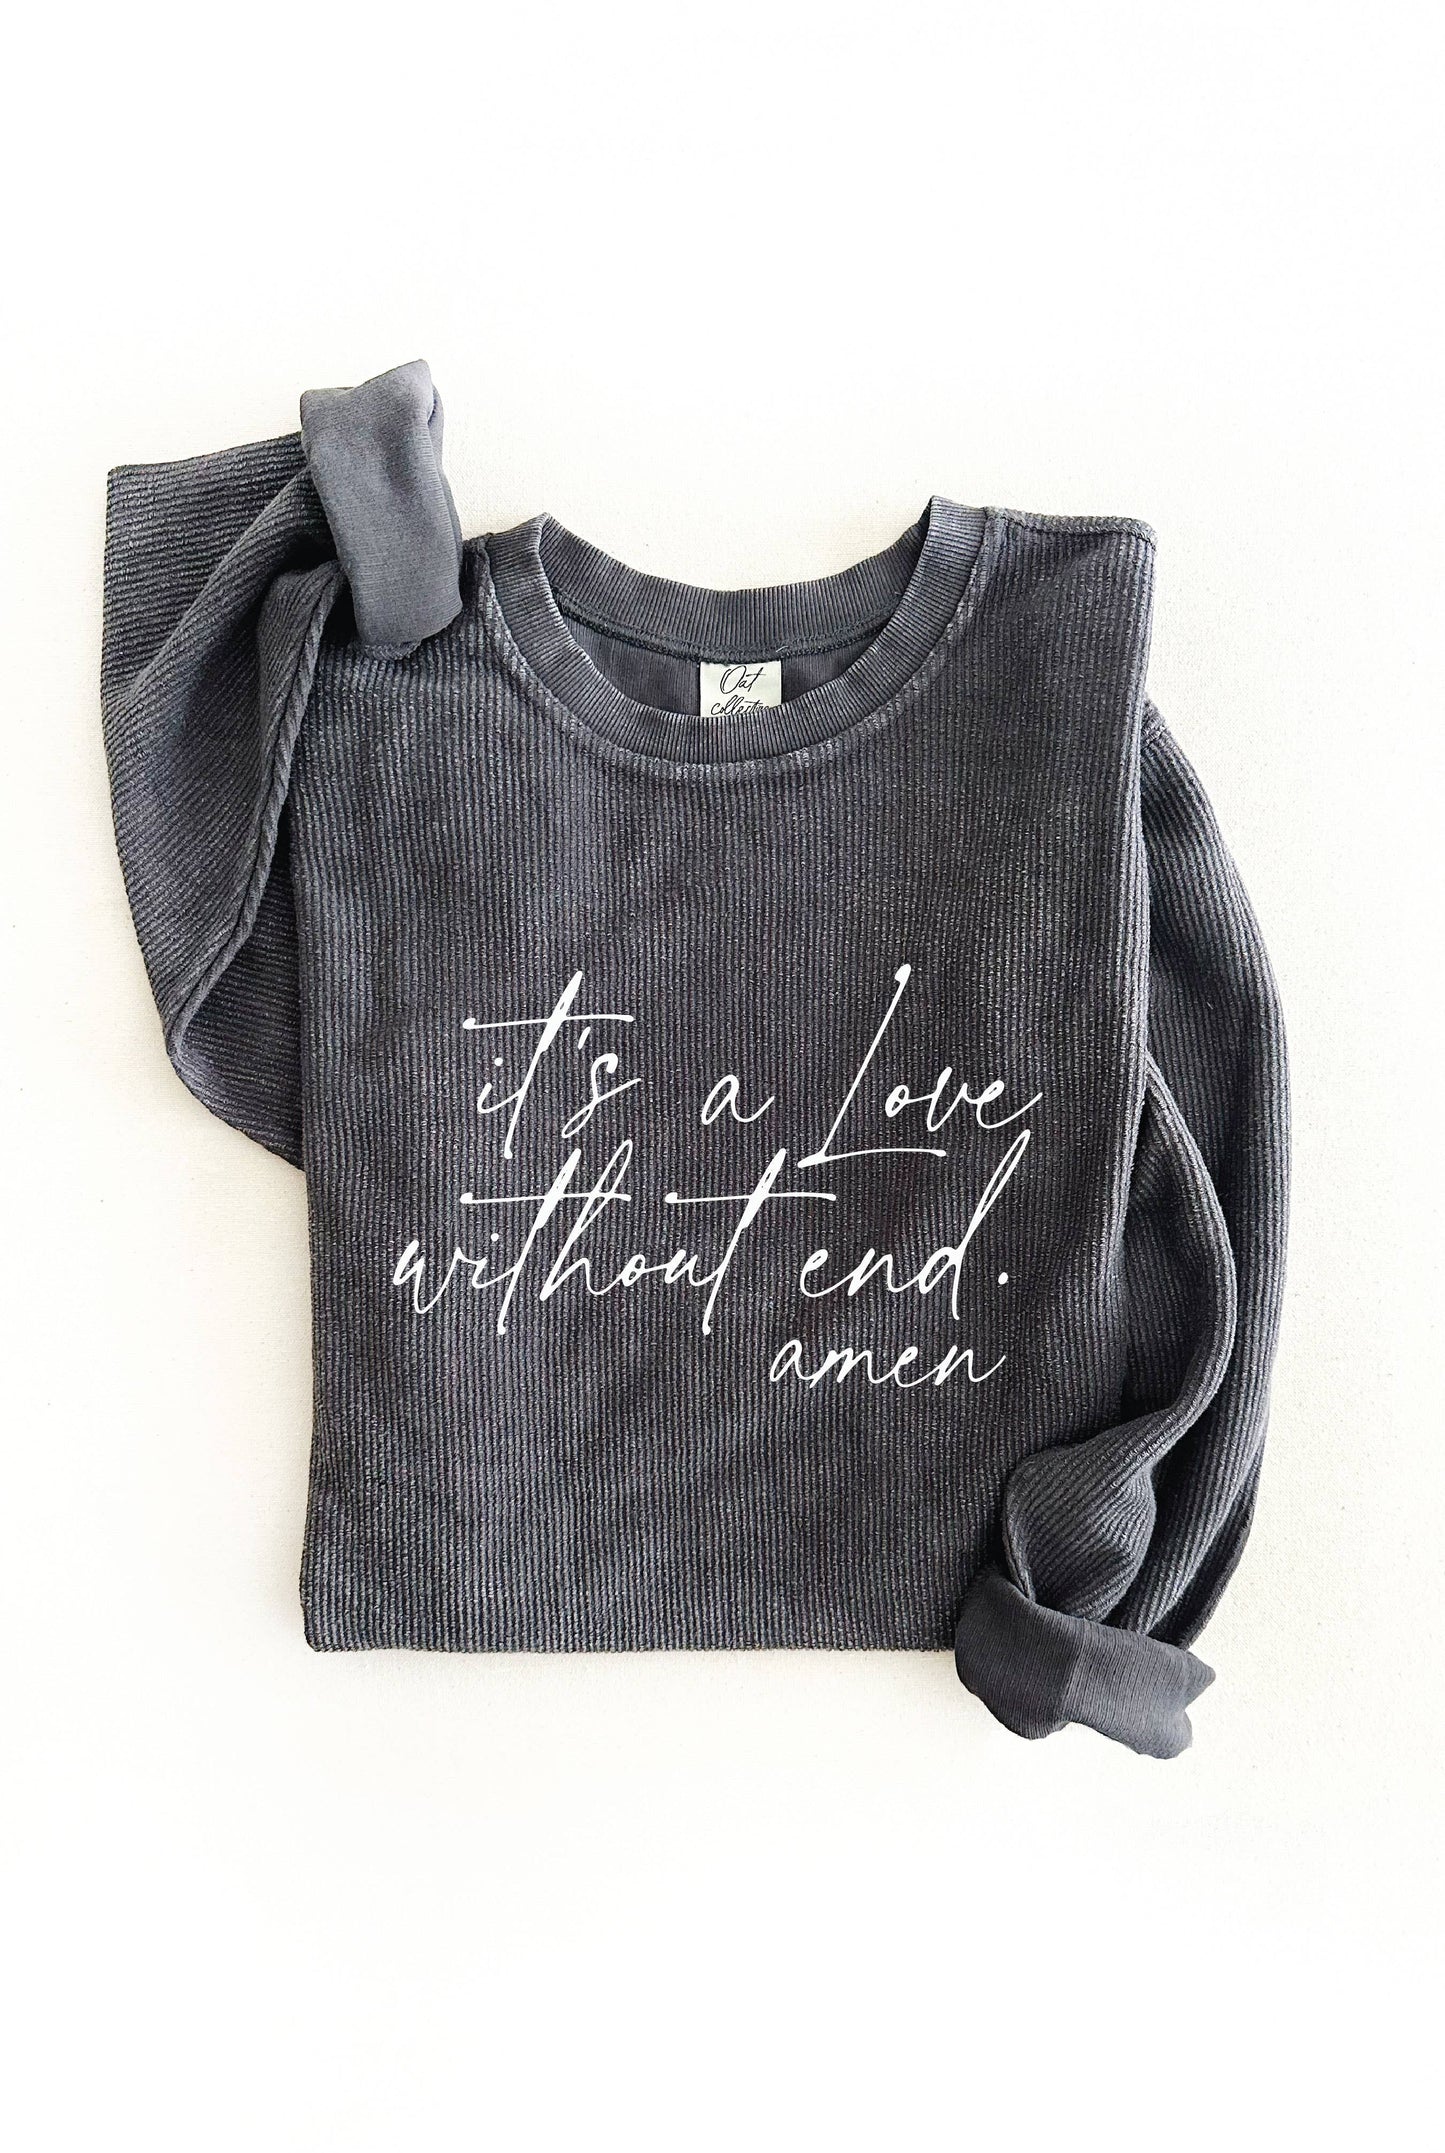 IT'S A LOVE WITHOUT END. AMEN Thermal Vintage Pullover: L / VINTAGE CHARCOAL